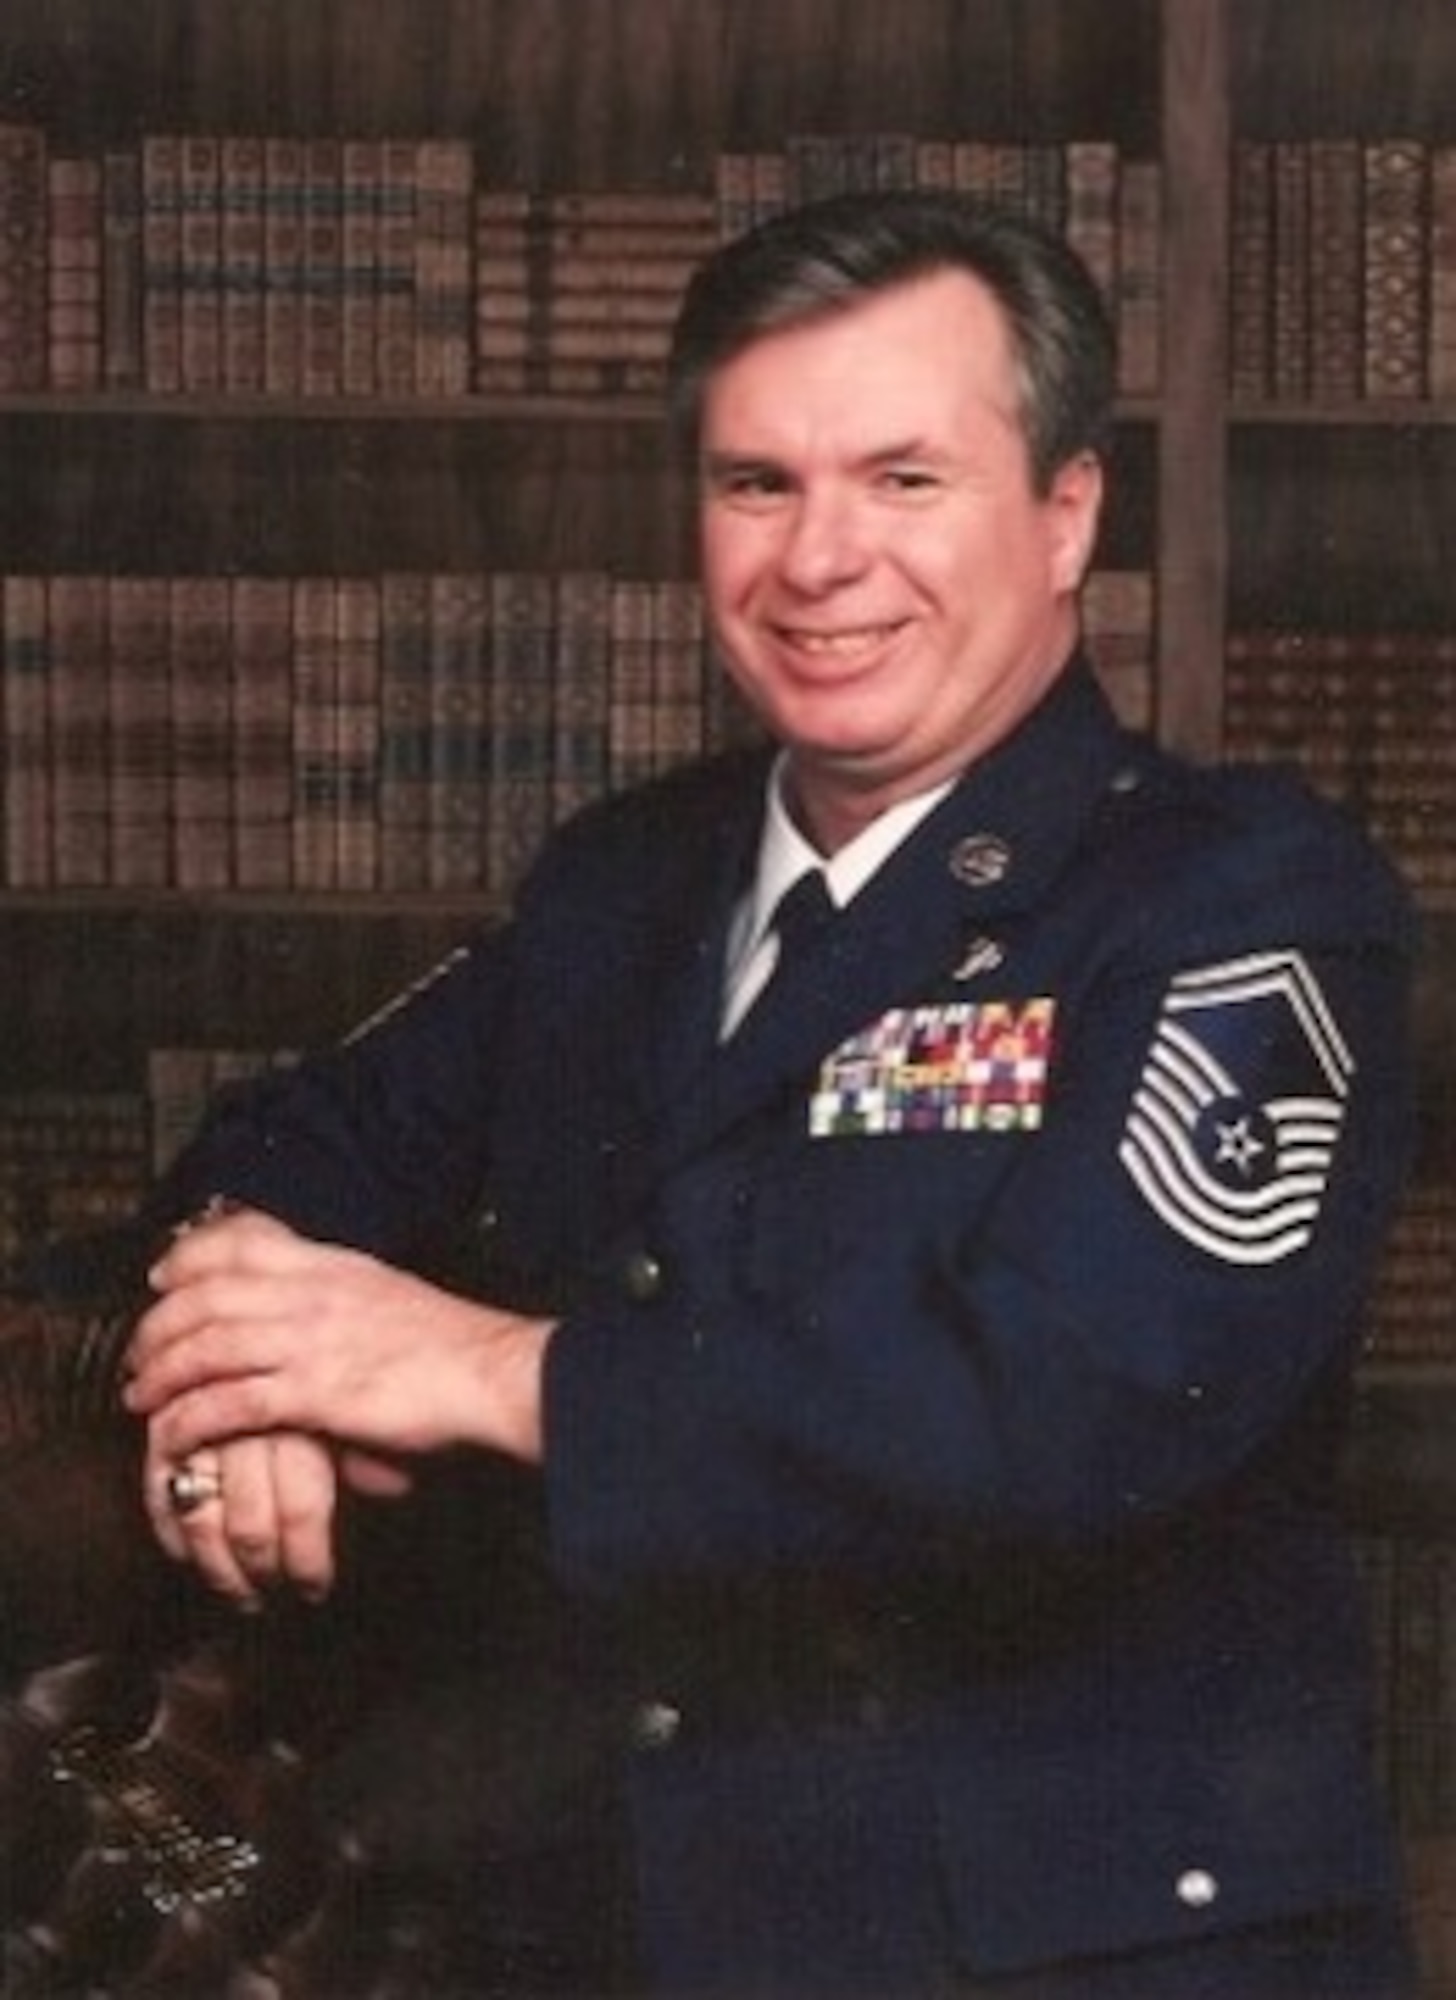 Air Force Office of Special Investigations Special Agent (Retired) Chief Master Sgt. Martin L. Pitt is a 2018 Inductee into the AFOSI Hall of Fame. (Courtesy photo)